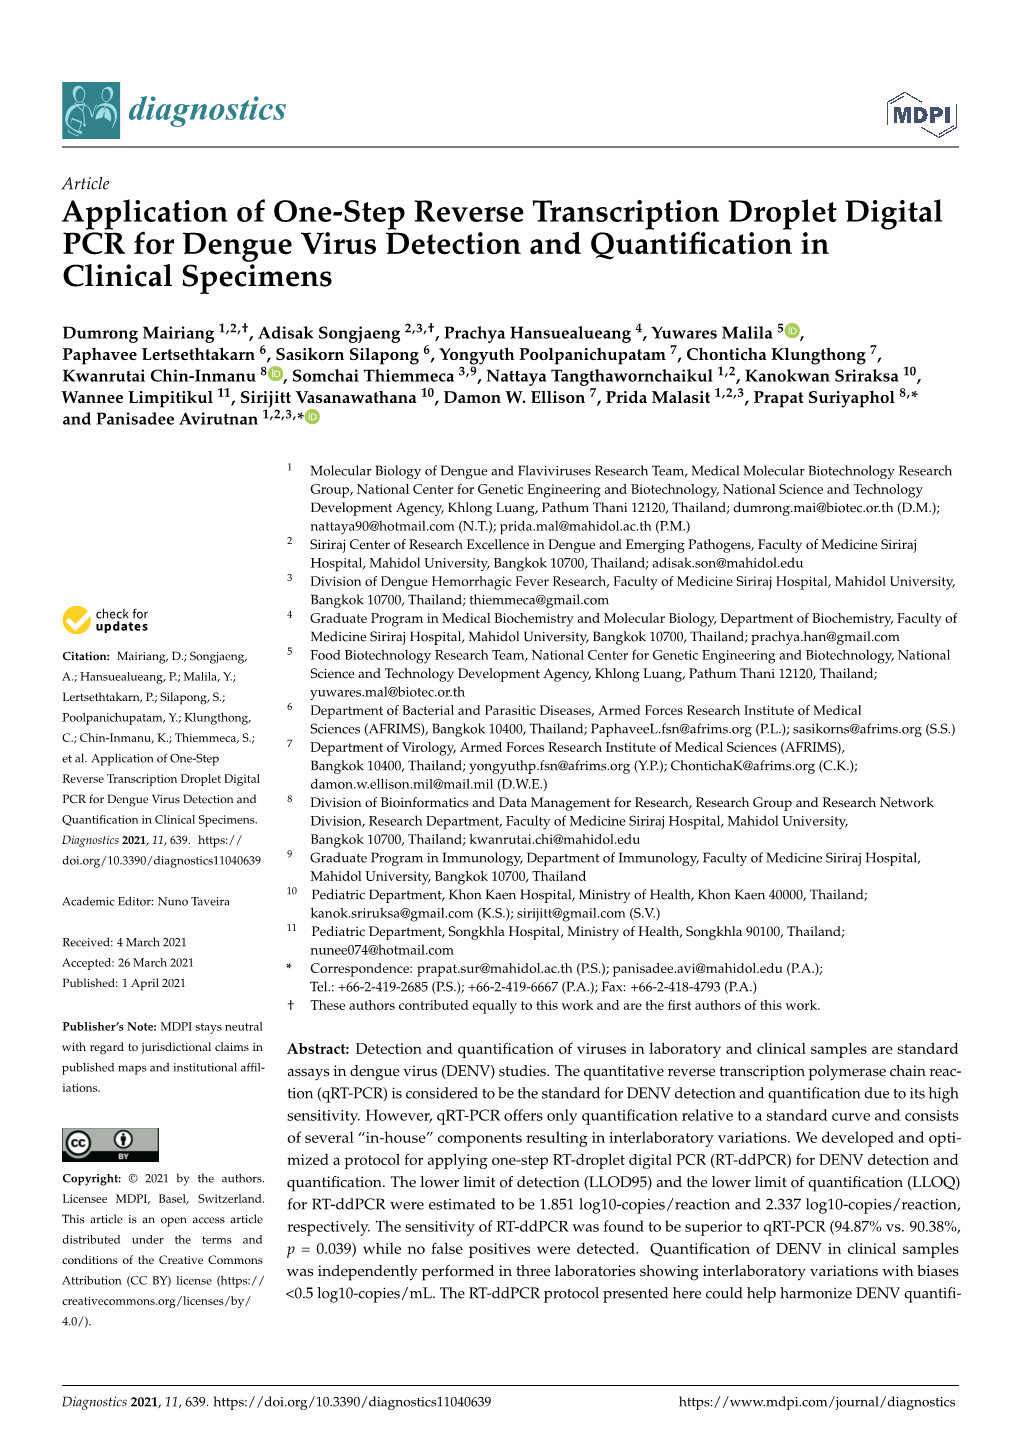 Application of One-Step Reverse Transcription Droplet Digital PCR for Dengue Virus Detection and Quantiﬁcation in Clinical Specimens